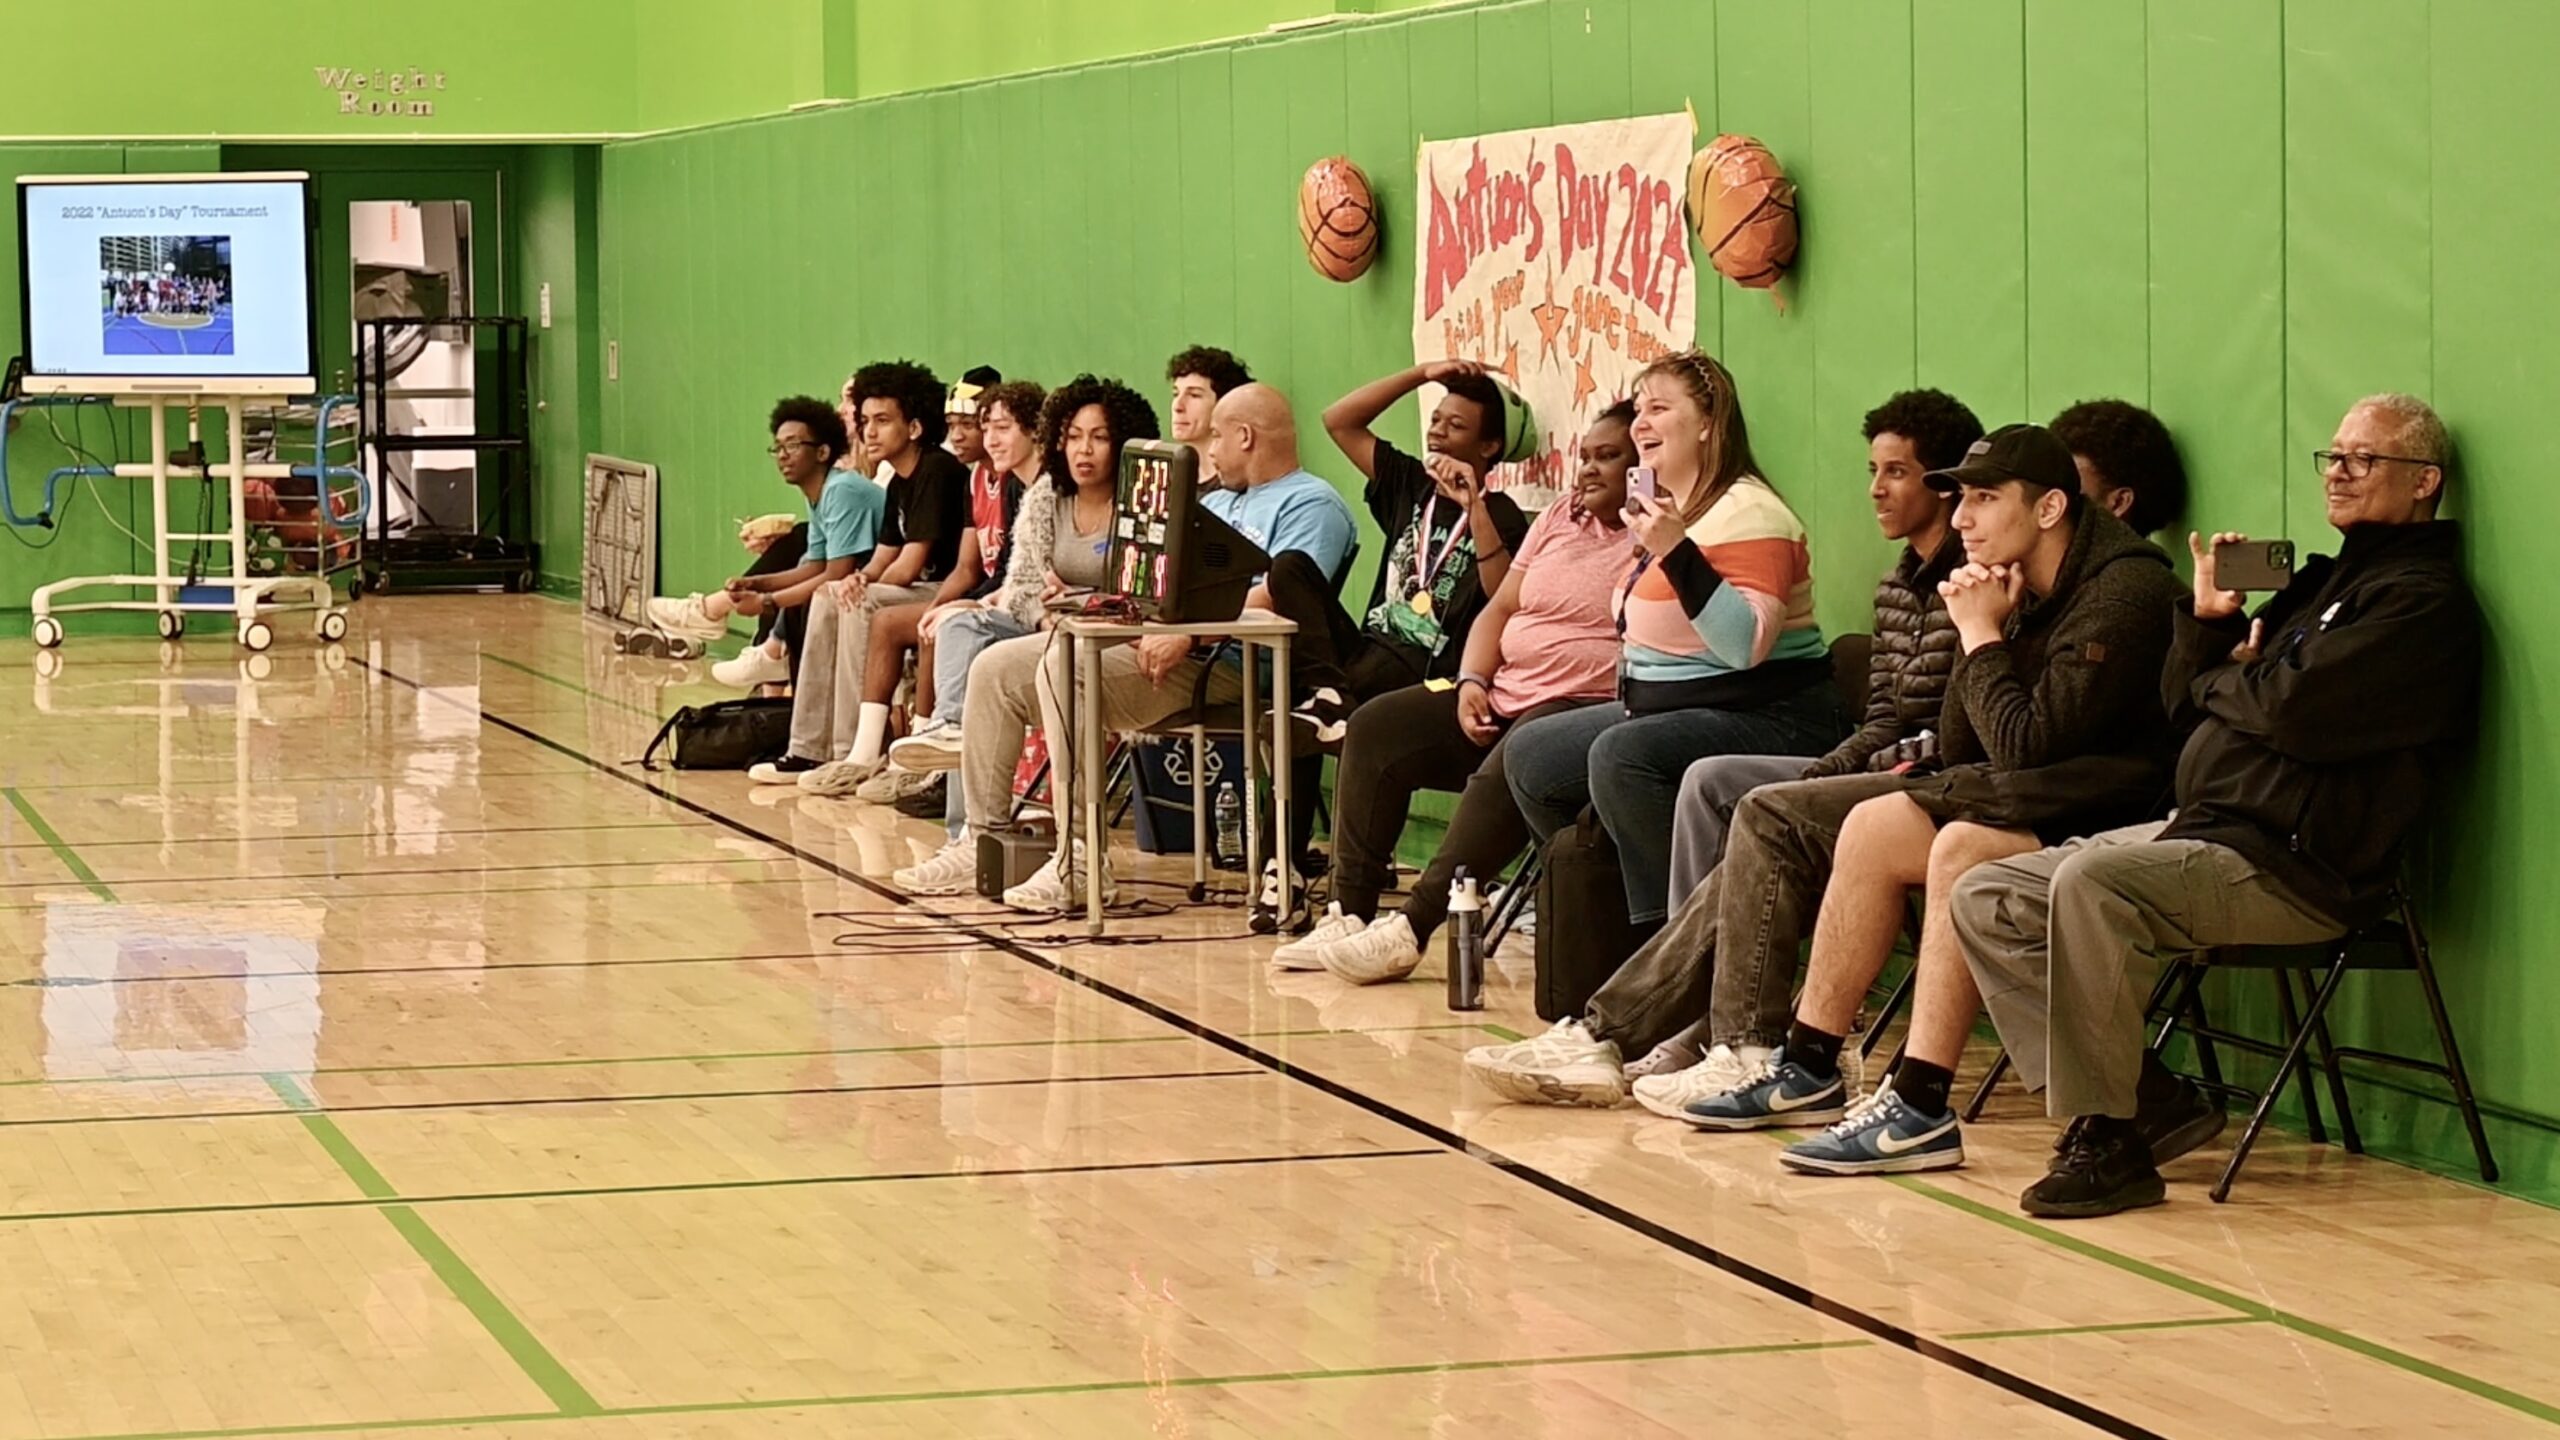 The audience sitting against the wall watching the basketball games